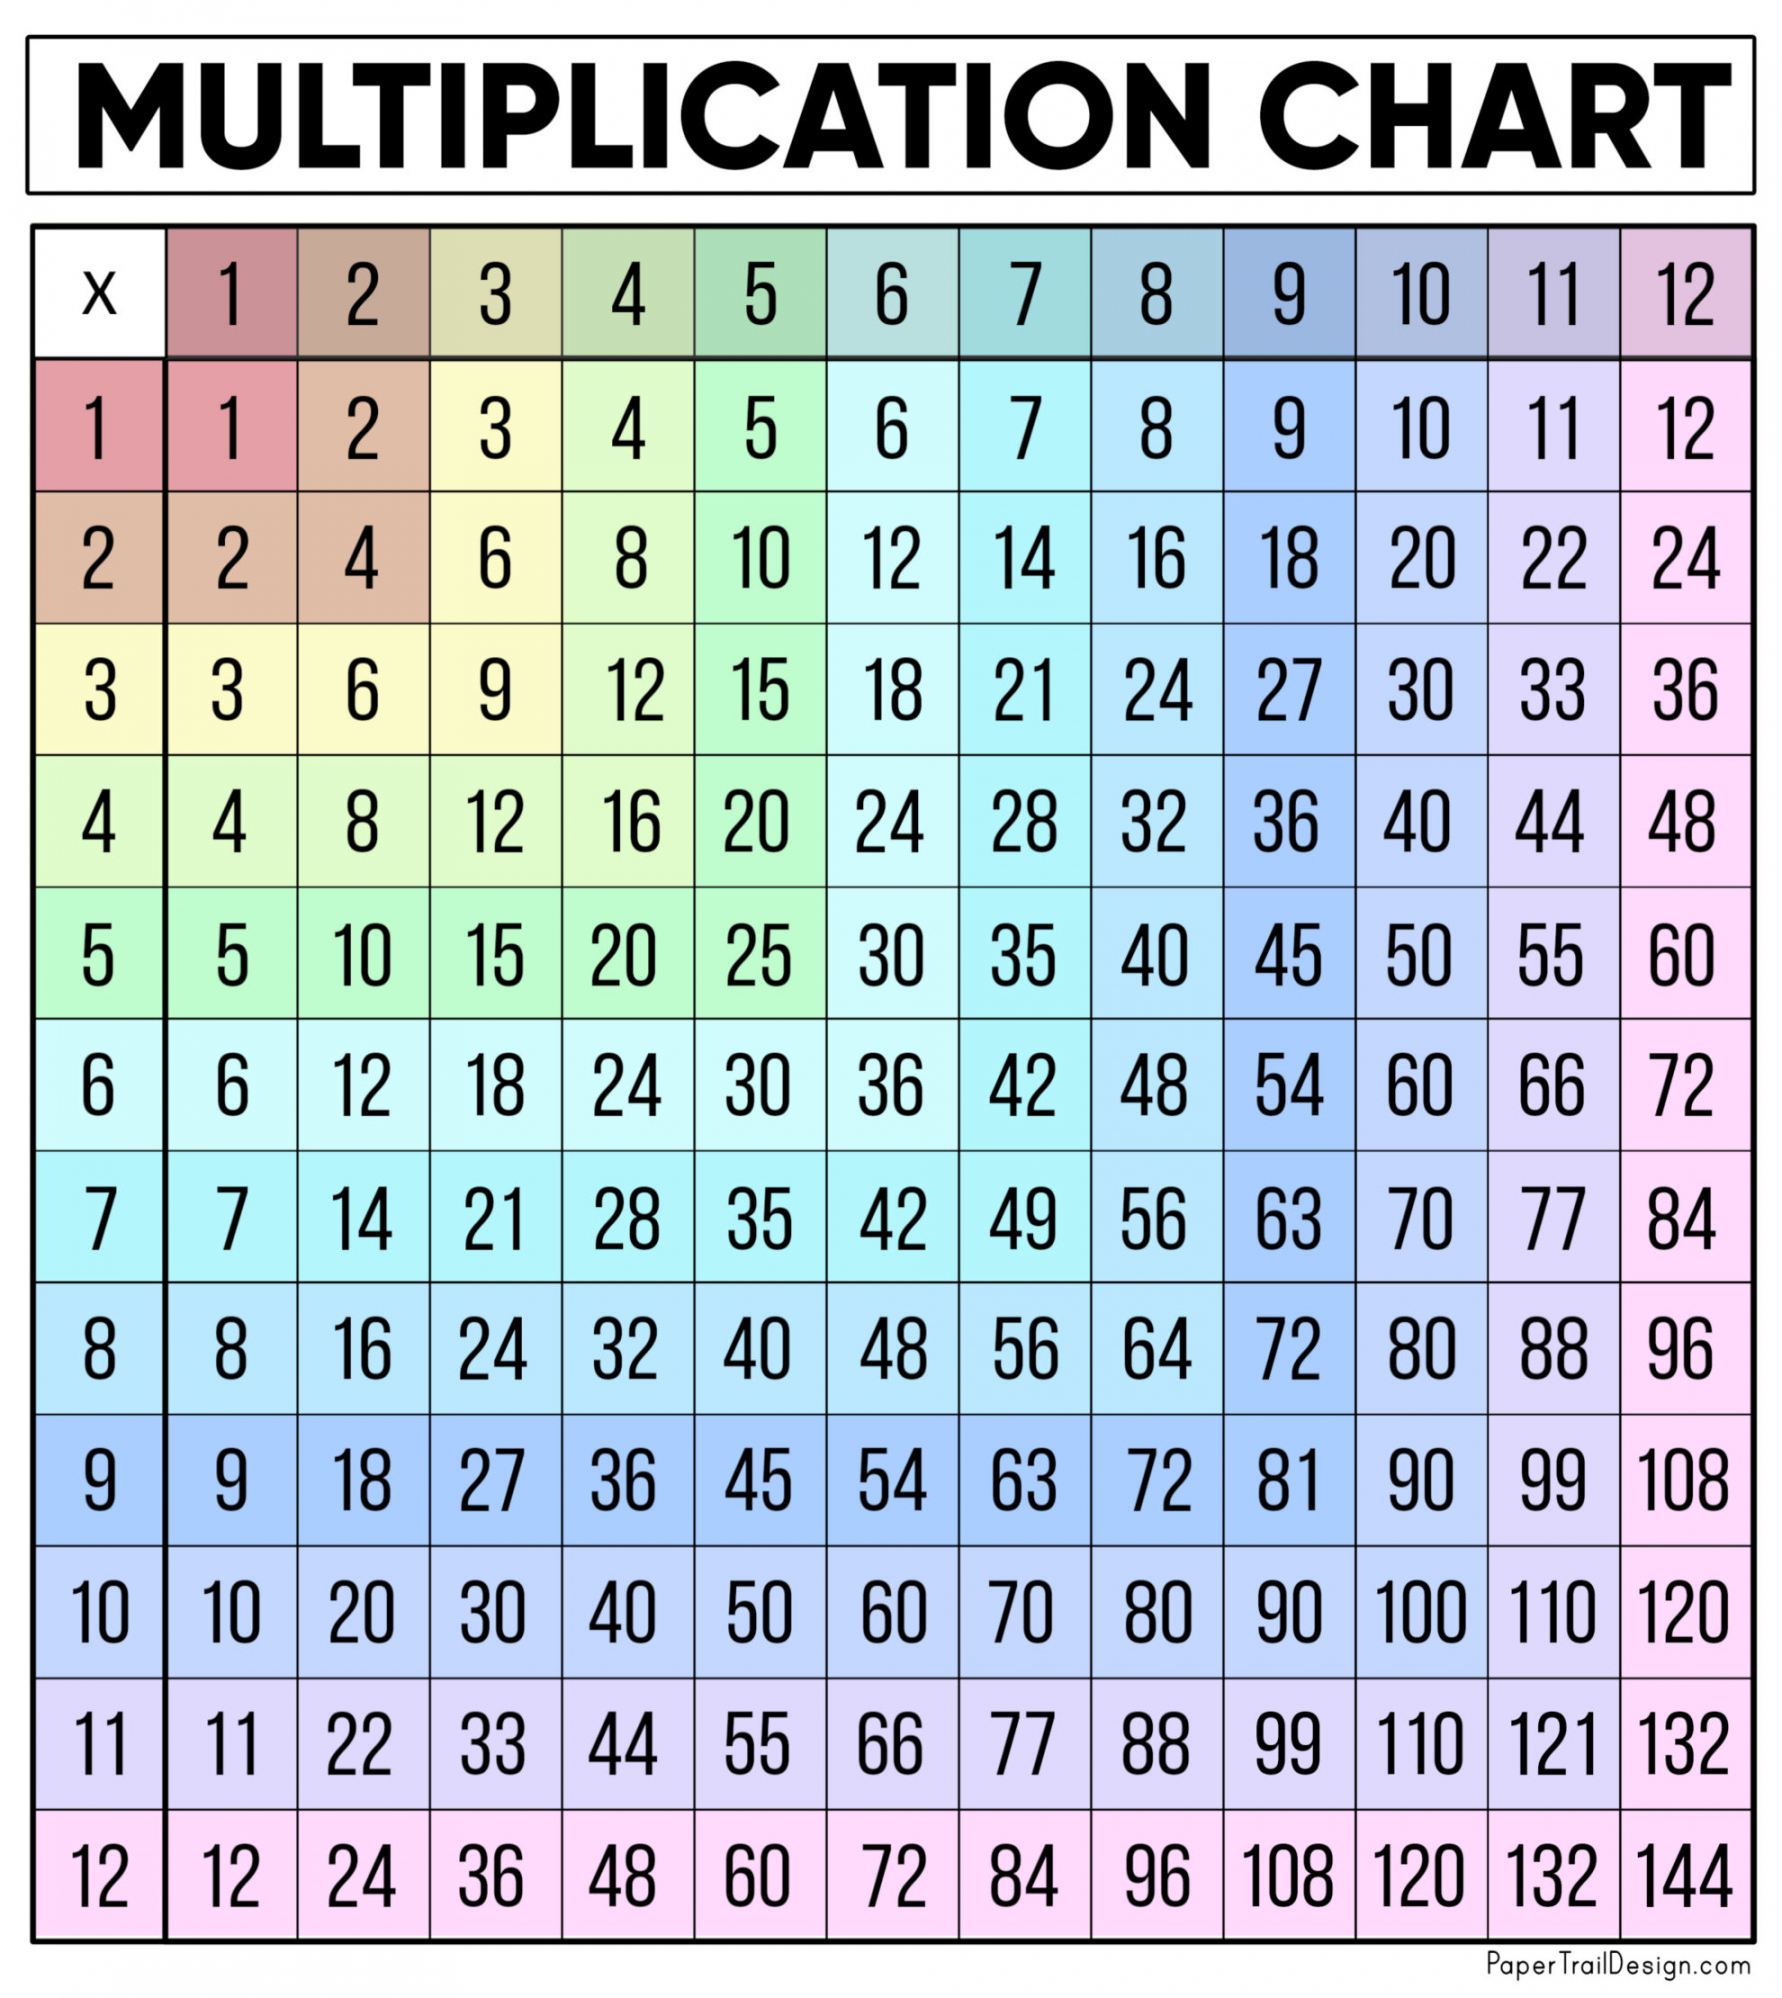 Free Multiplication Chart Printable - Paper Trail Design - FREE Printables - Multiplication Chart To 12